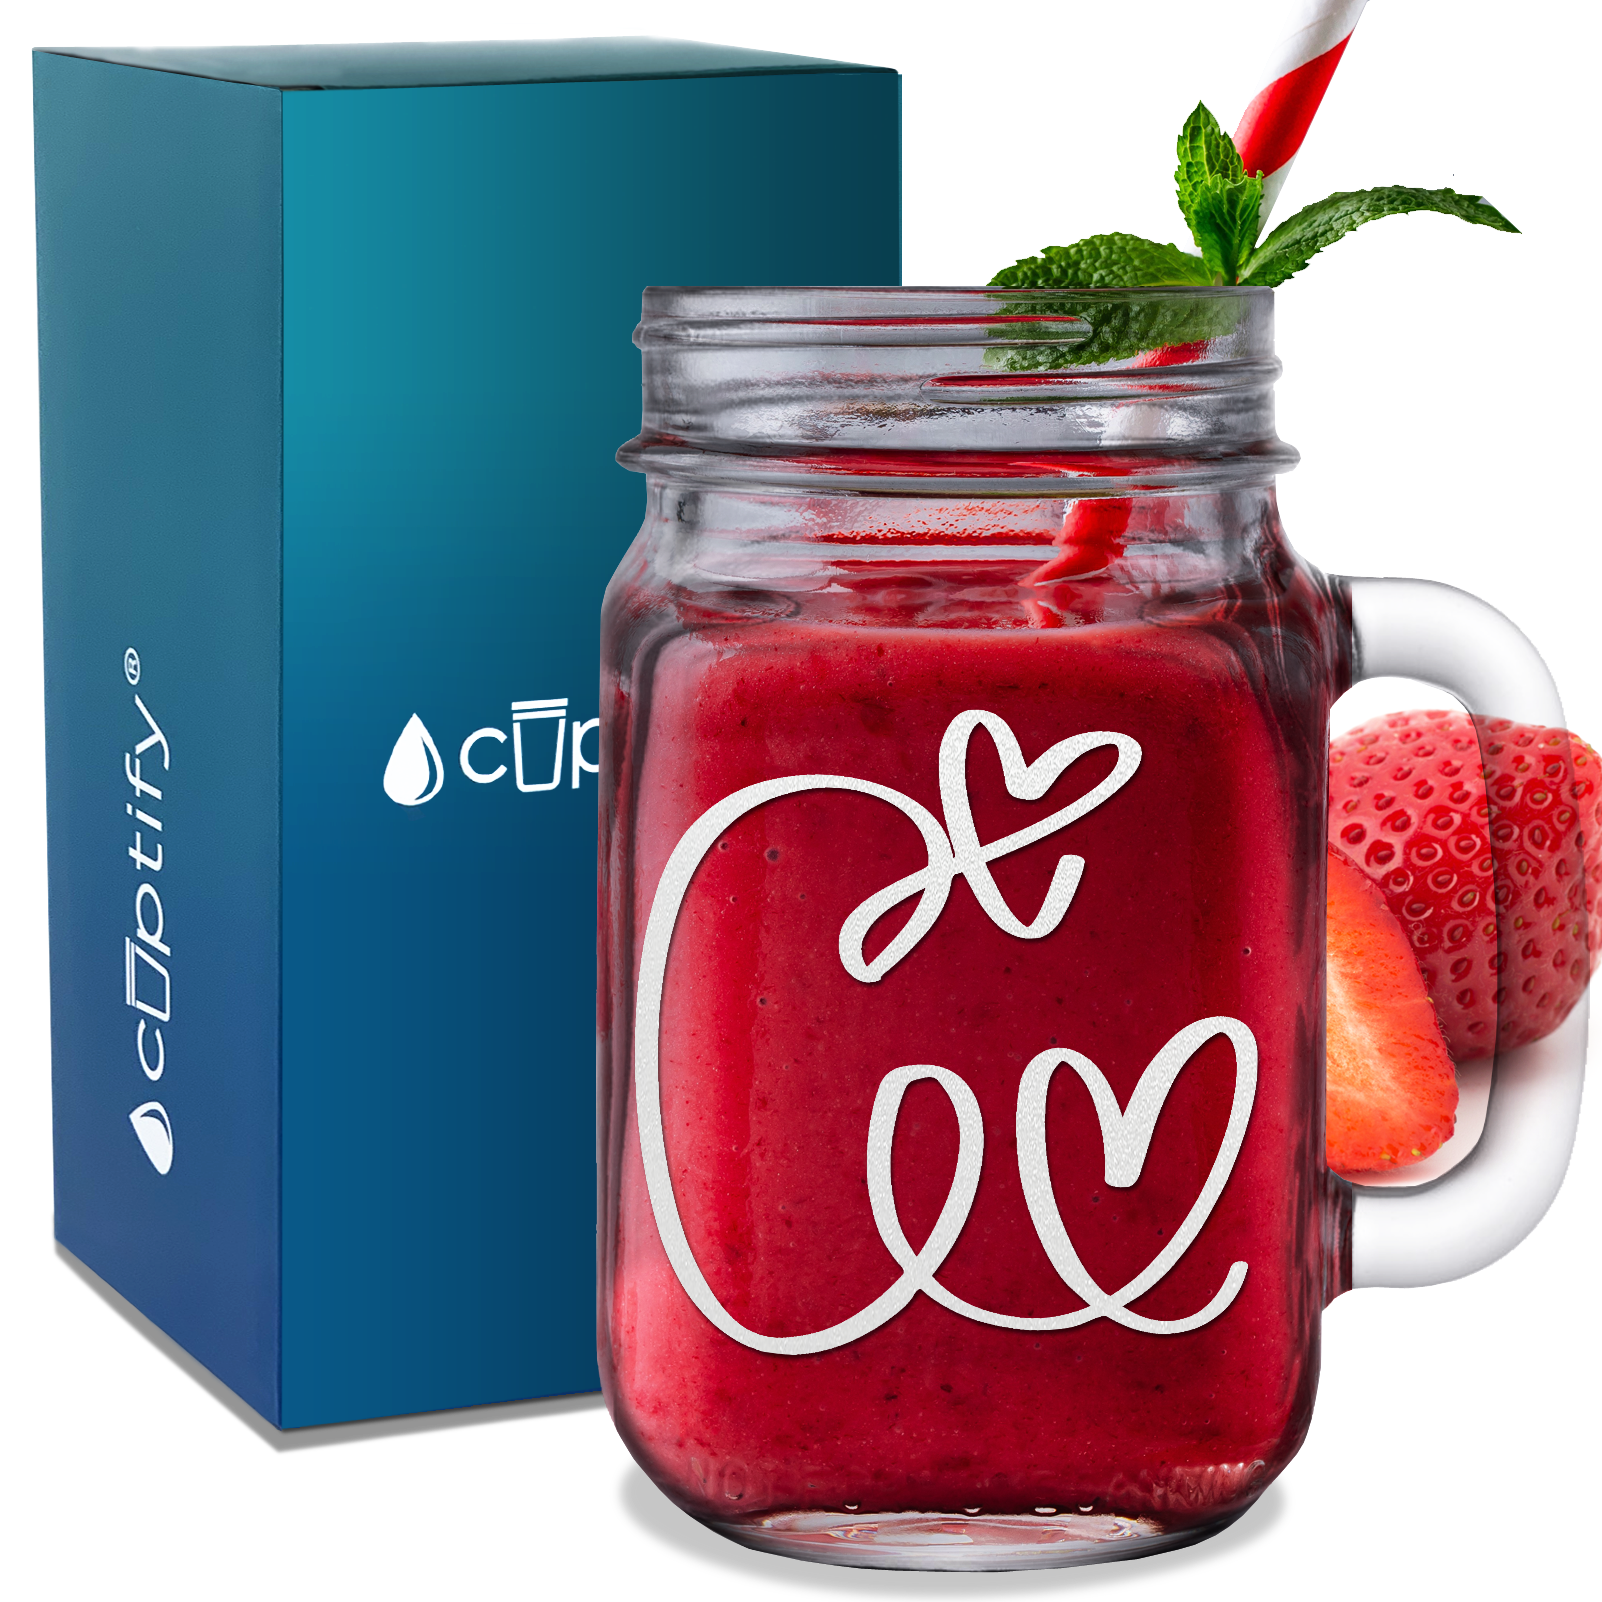  Monogram Hearts Initial Letter C Etched on 16 oz Mason Jar Glass